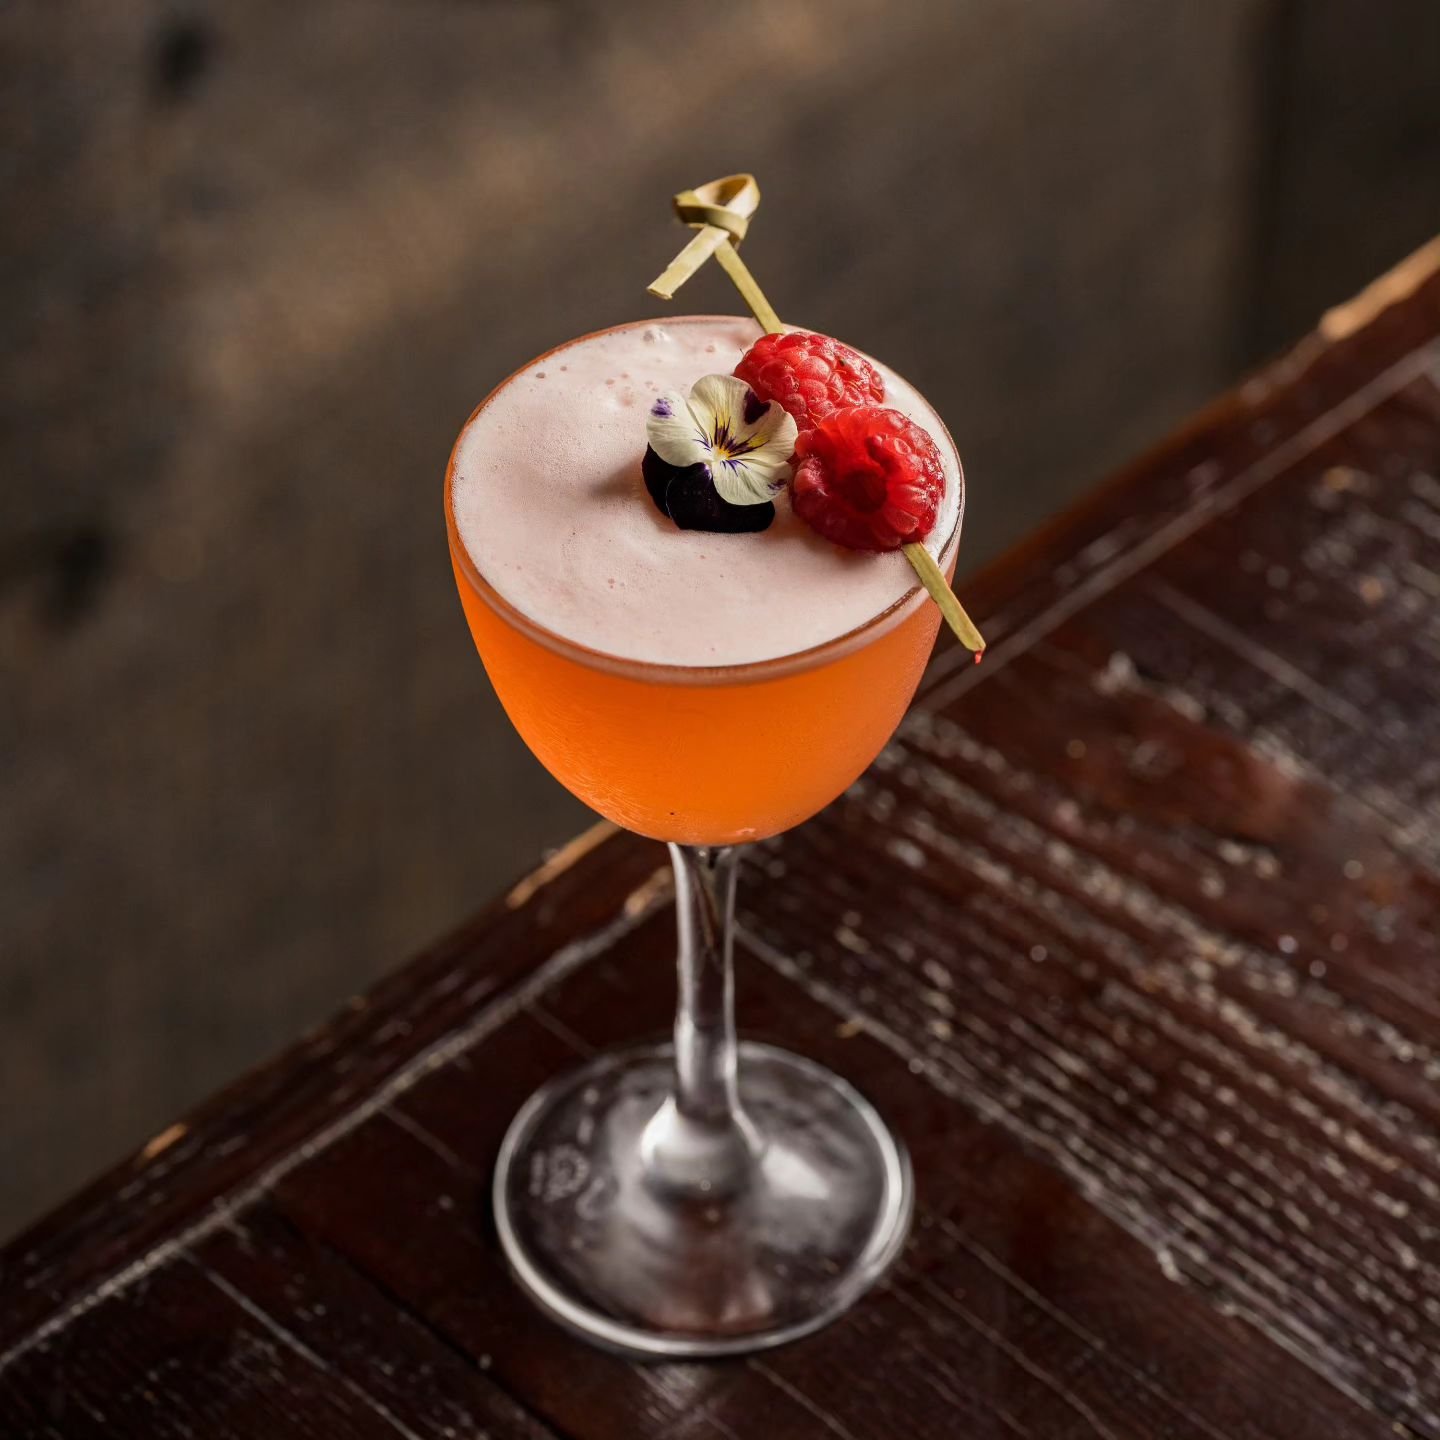 🚨 Our new cocktail menu is LIVE! Try our Asian fusion cocktails and let us transport you to far away shores. 

Pictured: Sakura No Hana

A cherry blossom flavoured Japanese gin in a cocktail that is a dessert-like delight. Made with Ukiyo Japanese b